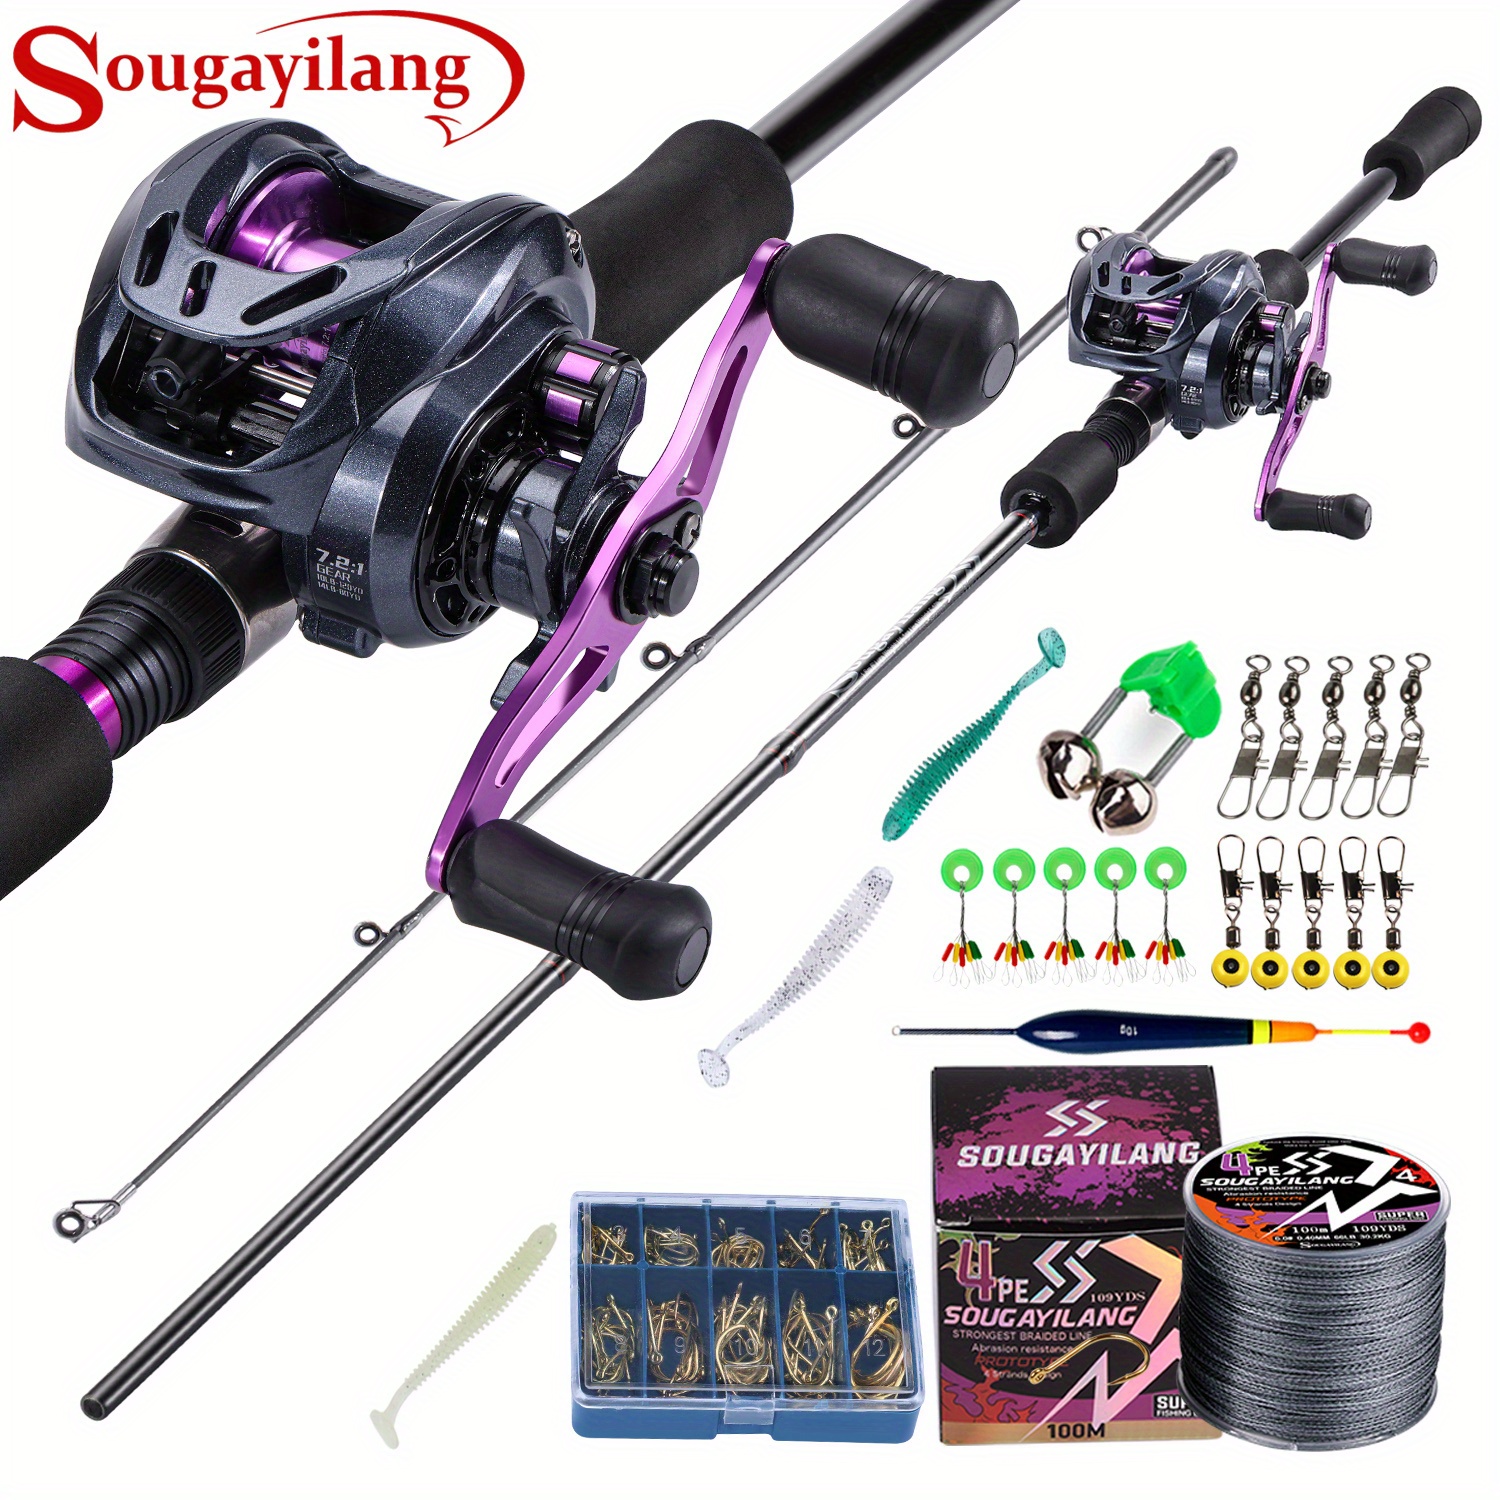 

Sougayilang Fishing Rod & Reel Set, 2-section Composite Graphite And Fiberglass Blank Rod With 8+1 Ball Bearings Baitcasting Reel - Max Drag 8kg, With Fishing Line Fishing Tackles